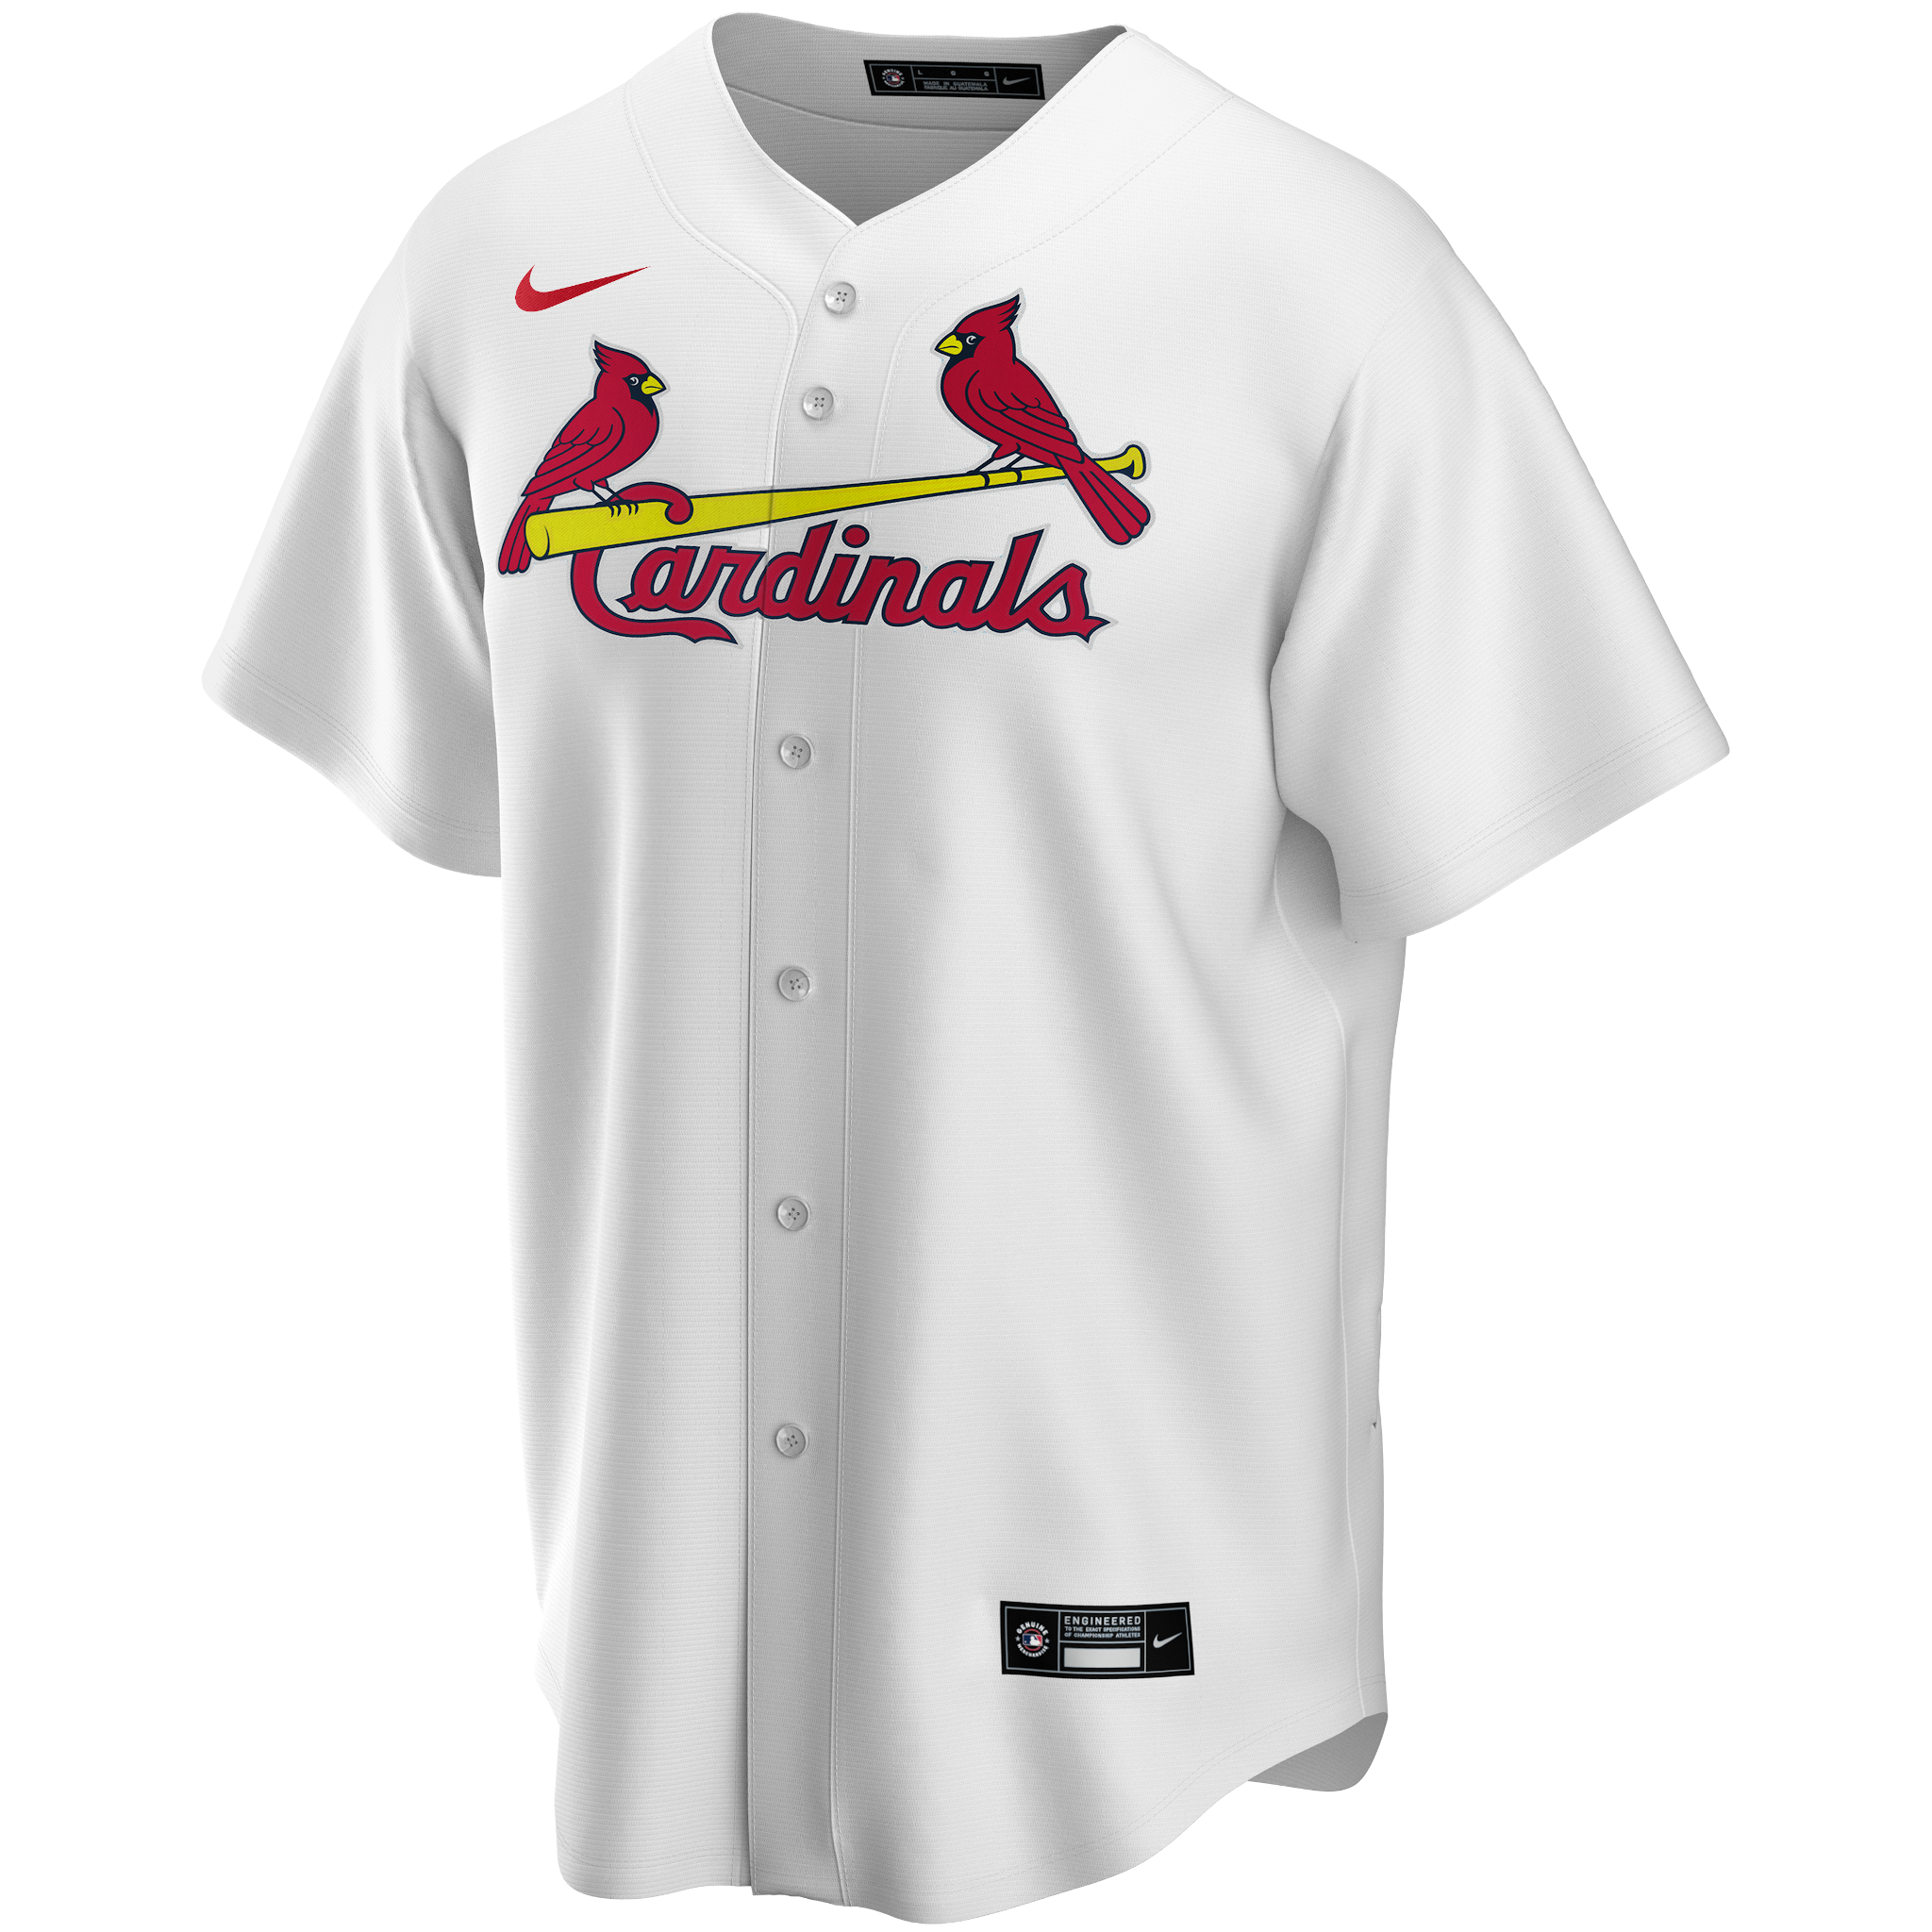 St. Louis Cardinals Lettering Kit for an Authentic Replica or 